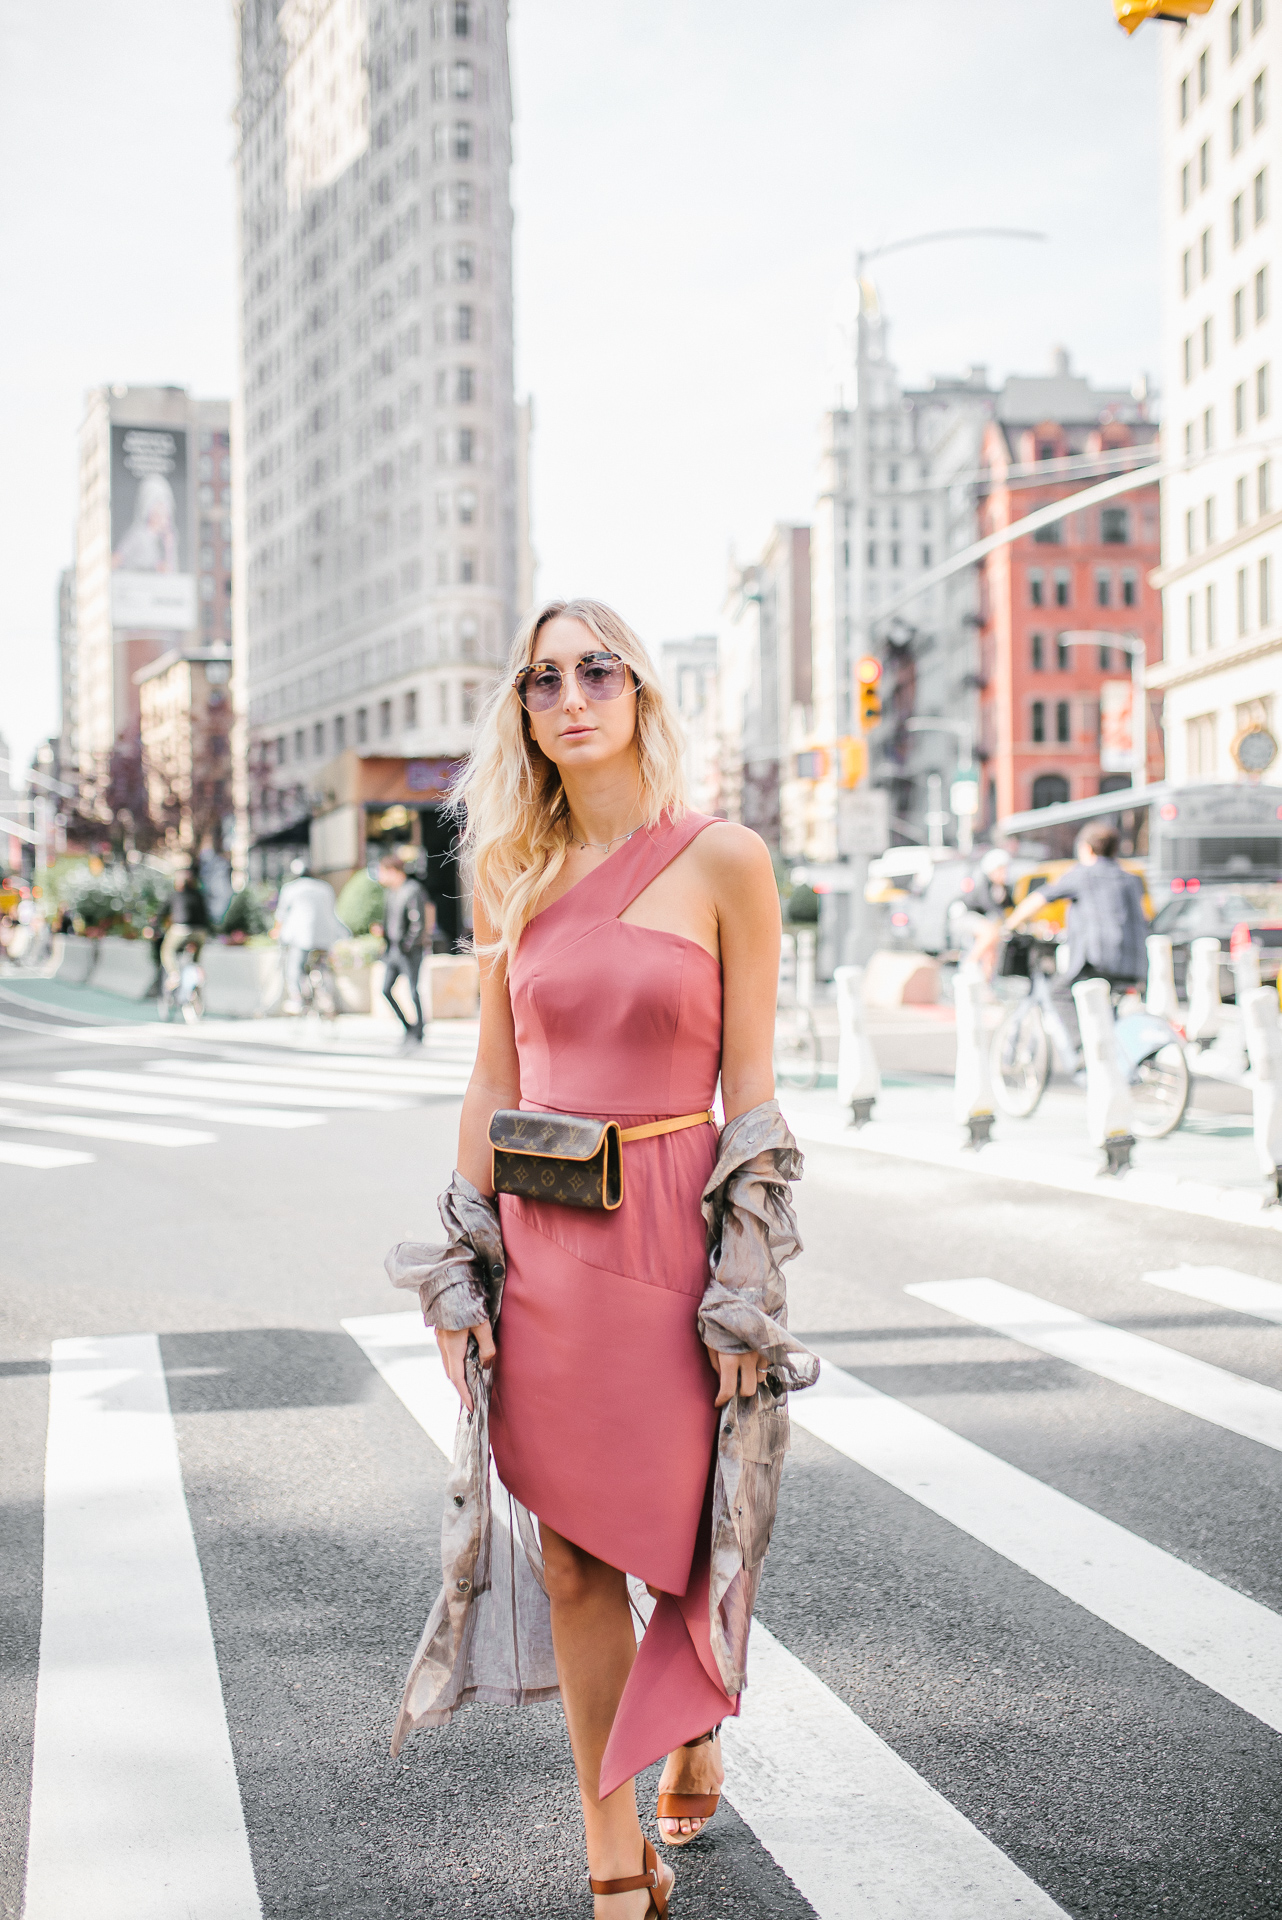 How to Wear a Fanny Pack #NYFW - Chiara